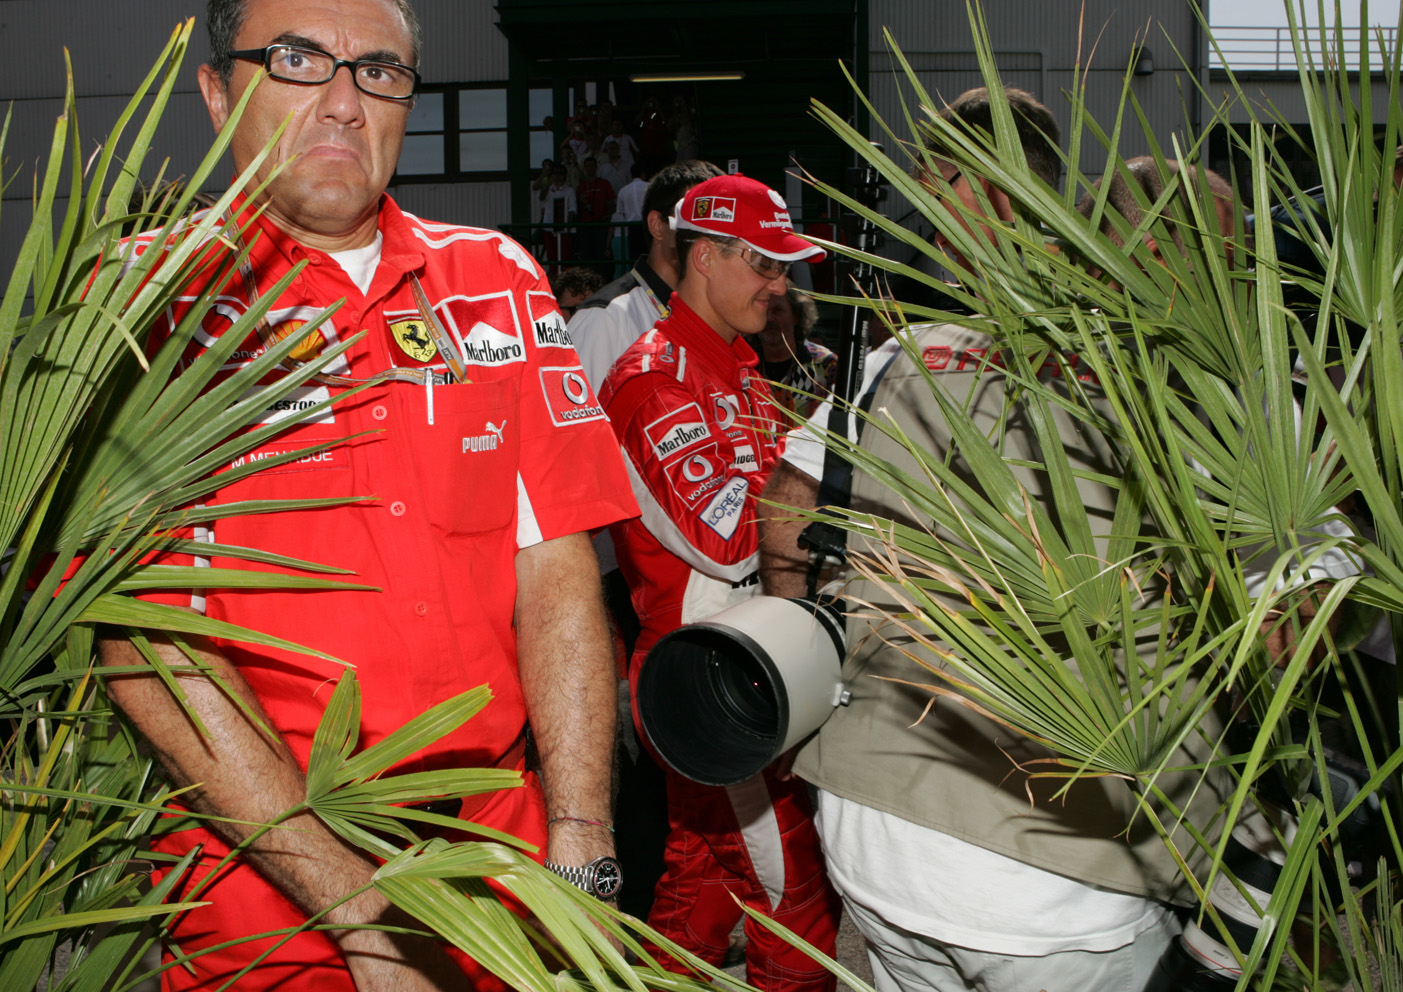 Michael Schumacher and team, squeeze through the paddock at the Canadian Grand Prix